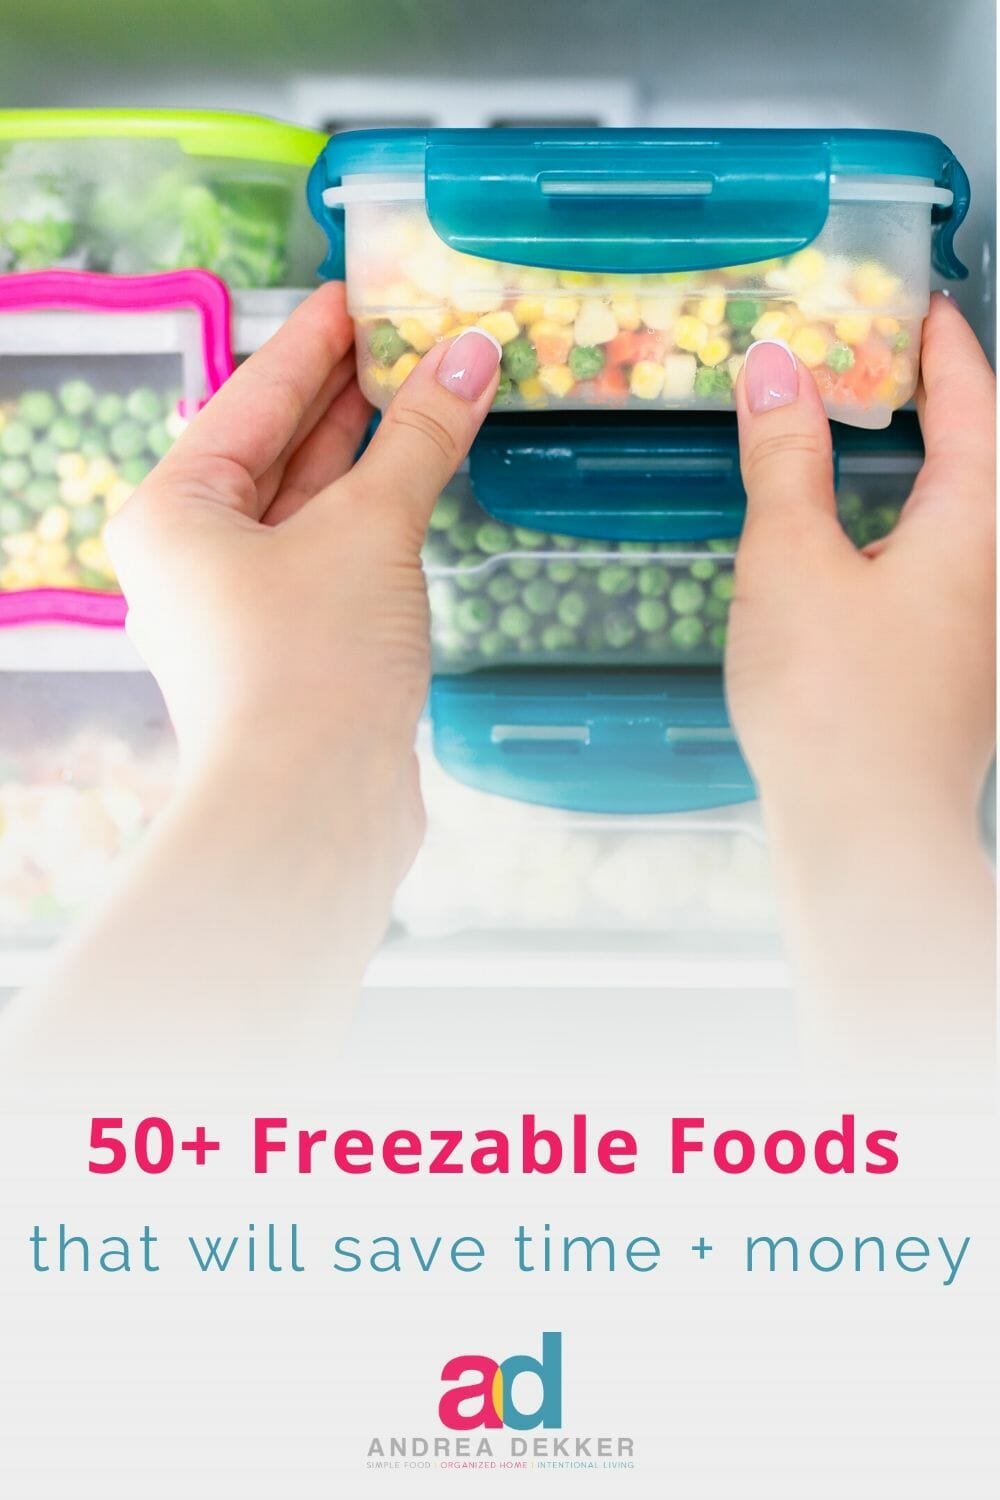 Learn how to freeze more than 50 freezable foods to save time in the kitchen, eliminate extra trips to the grocery store, and reduce wasted food.  via @andreadekker